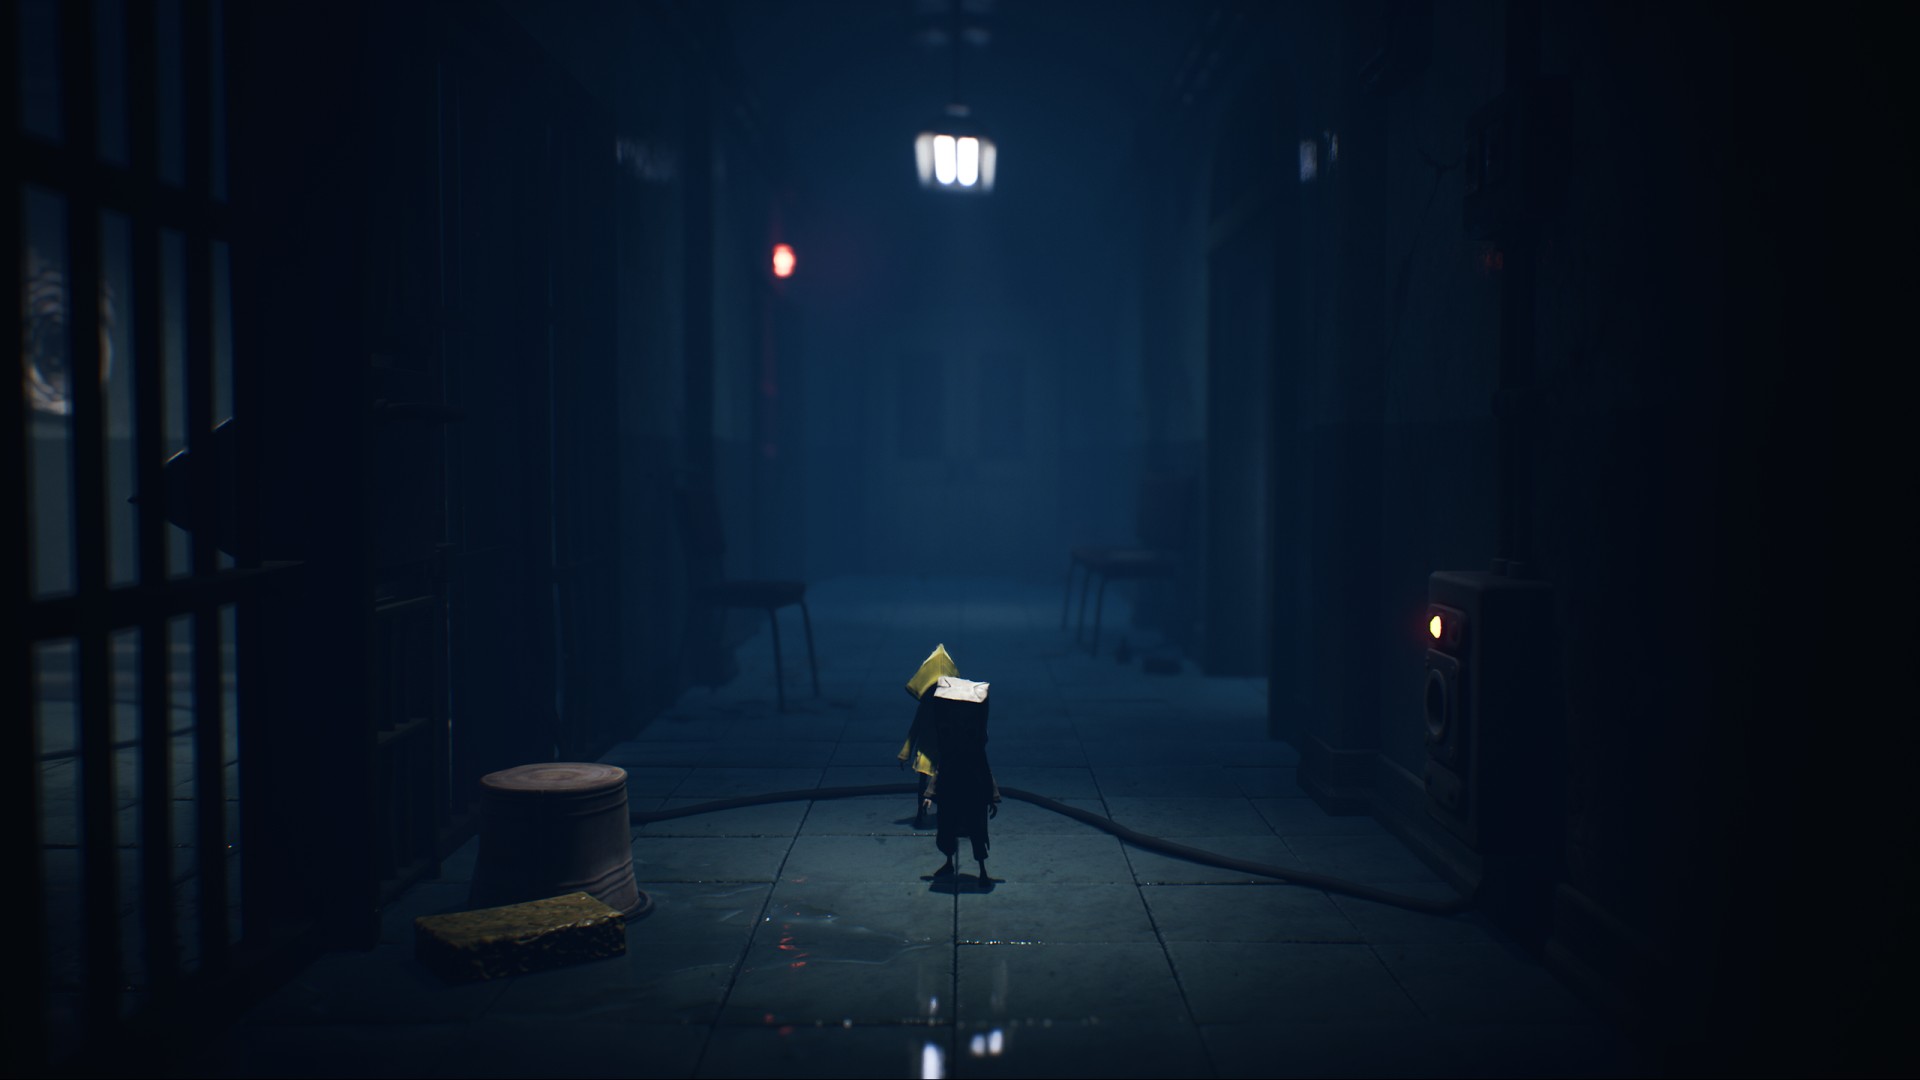 Little Nightmares III on X: Light is the only disinfectant available in  the depths of the Hospital, and treatment has been delayed far too long. #LittleNightmares  II  / X